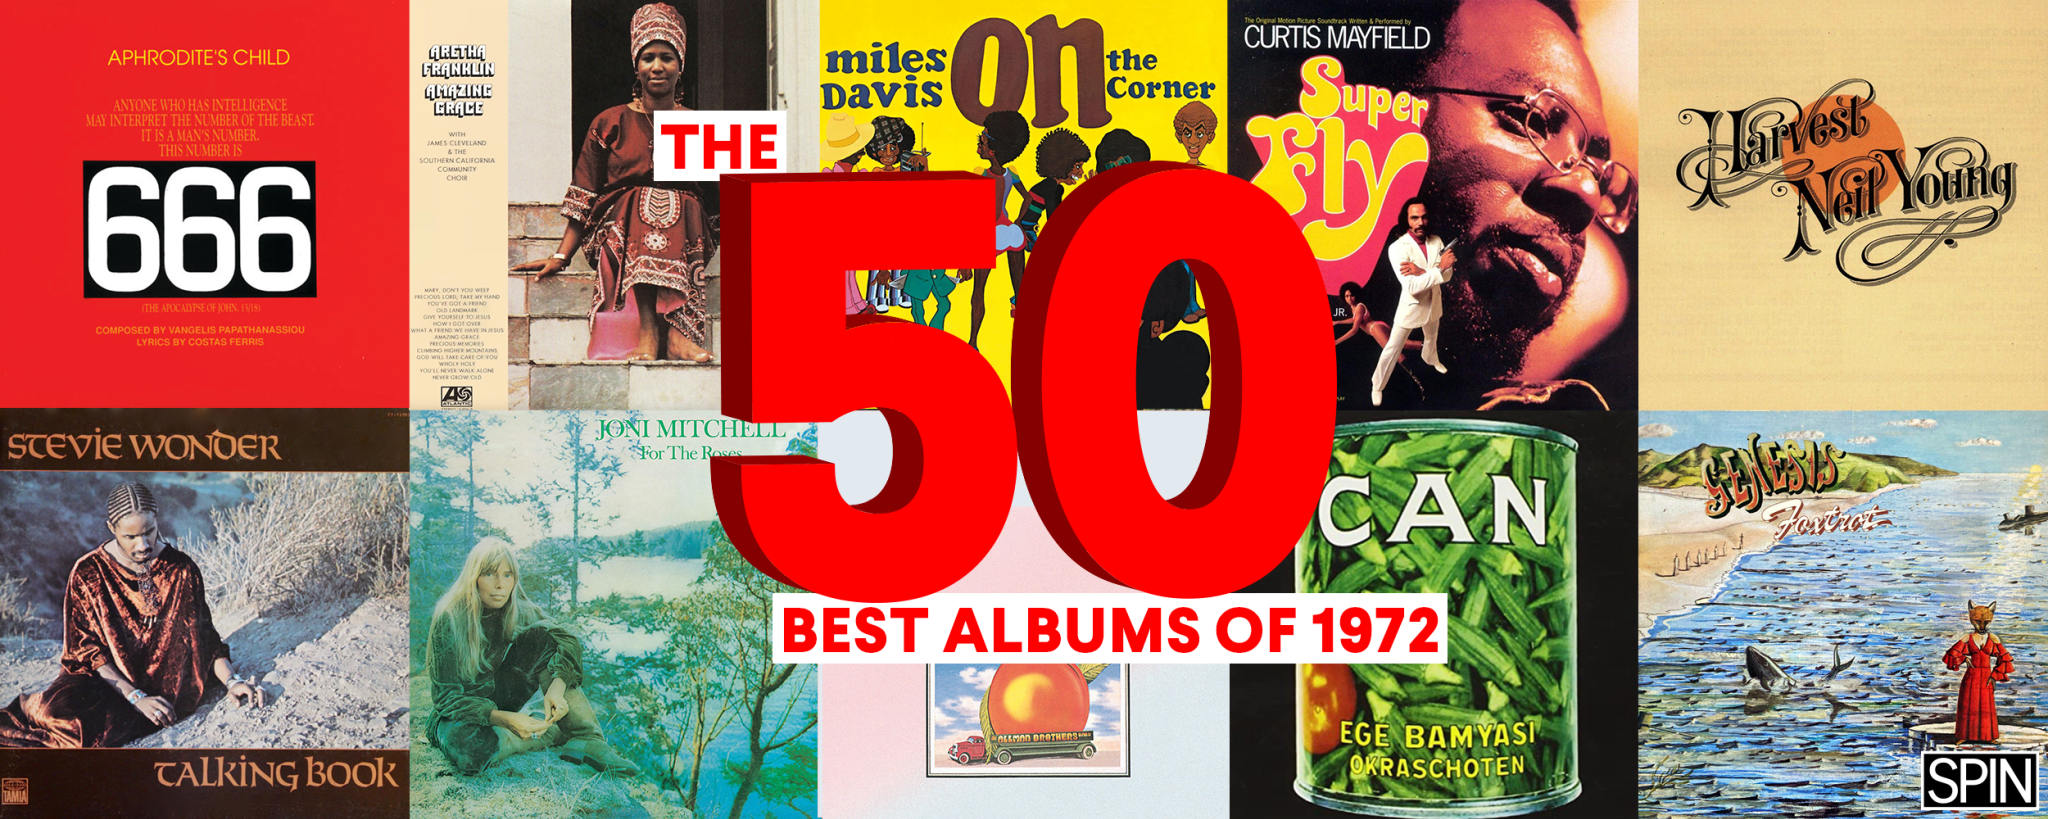 The 50 Best Albums of 1972 - Spin